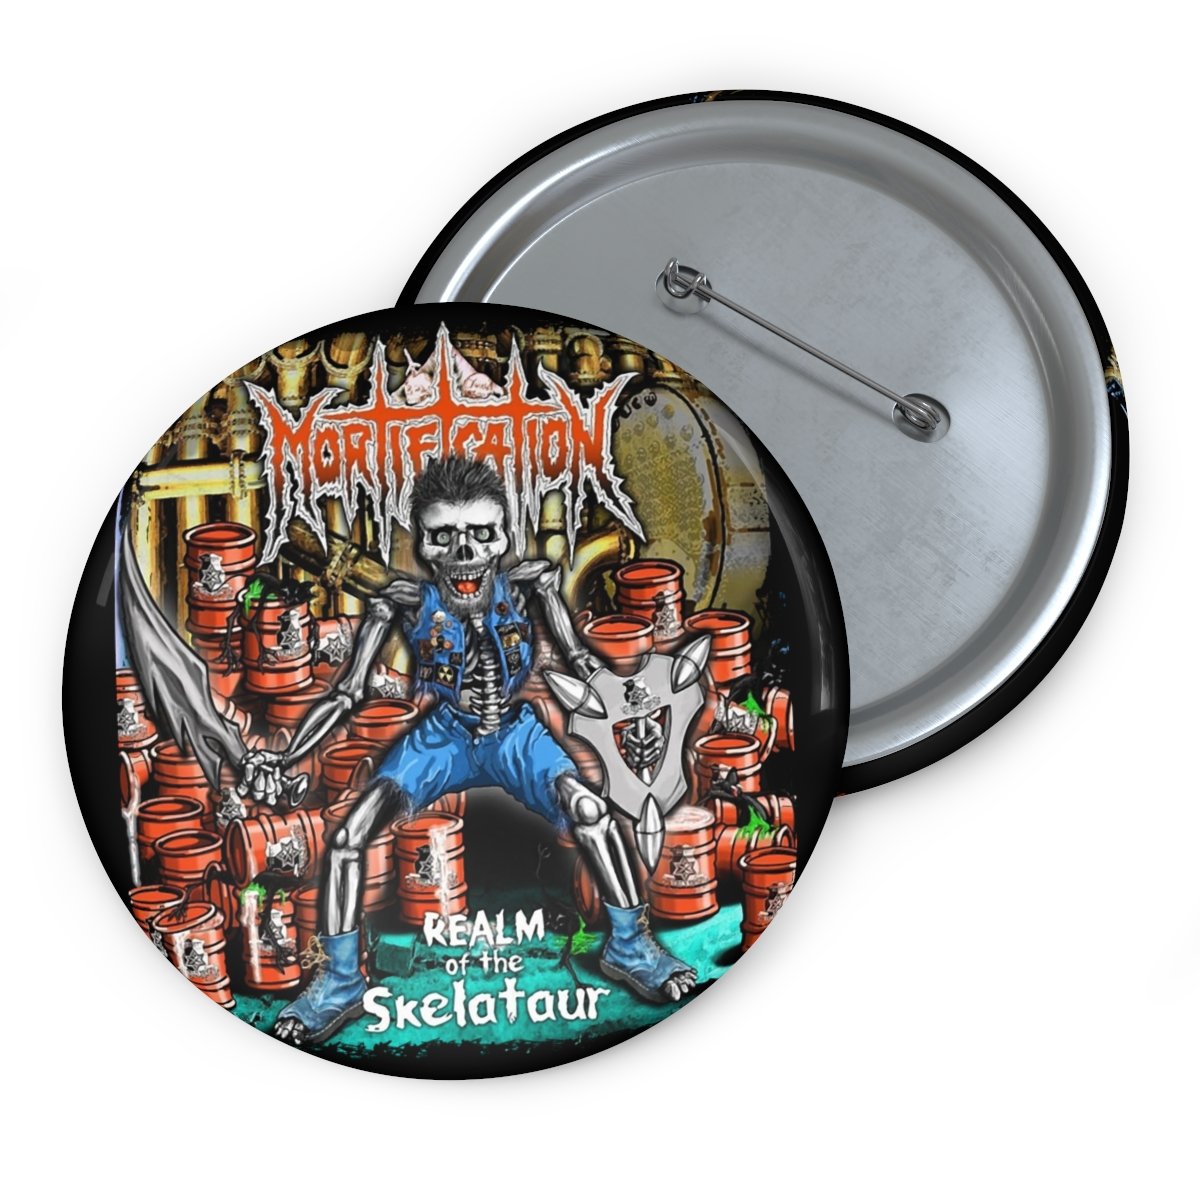 Mortification – Realm of the Skelataur Basic Pin Buttons